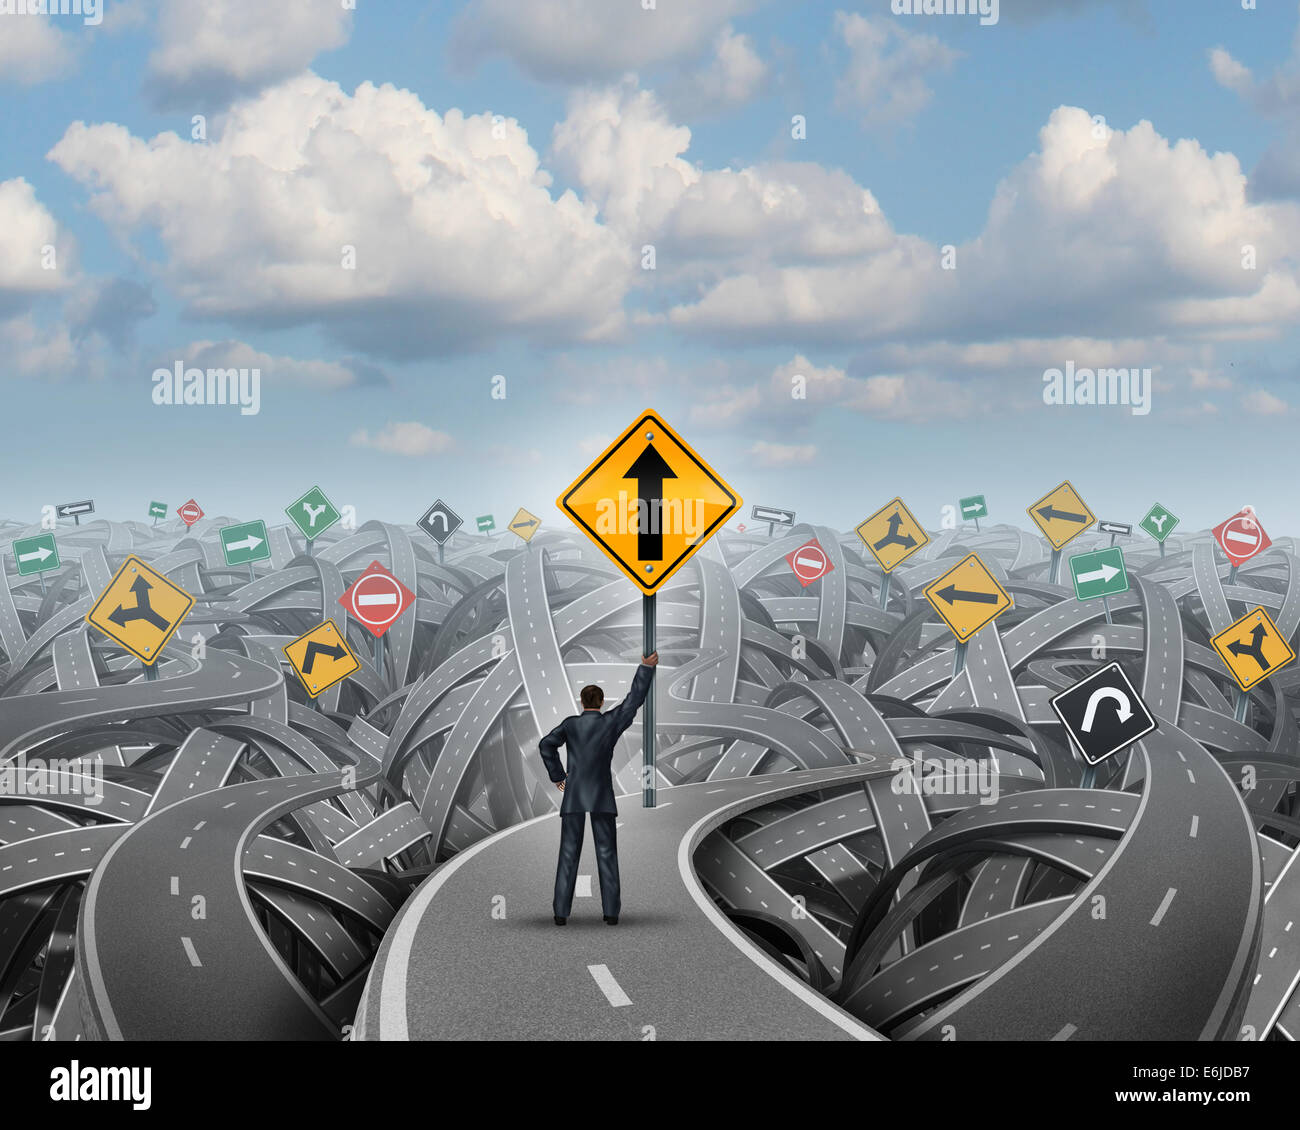 Success direction with a confident businessman standing on a group of tangled streets holding up a traffic sign with an upward arrow as a symbol for clear belief and conviction to a path of prosperity overcoming confusion and fear. Stock Photo